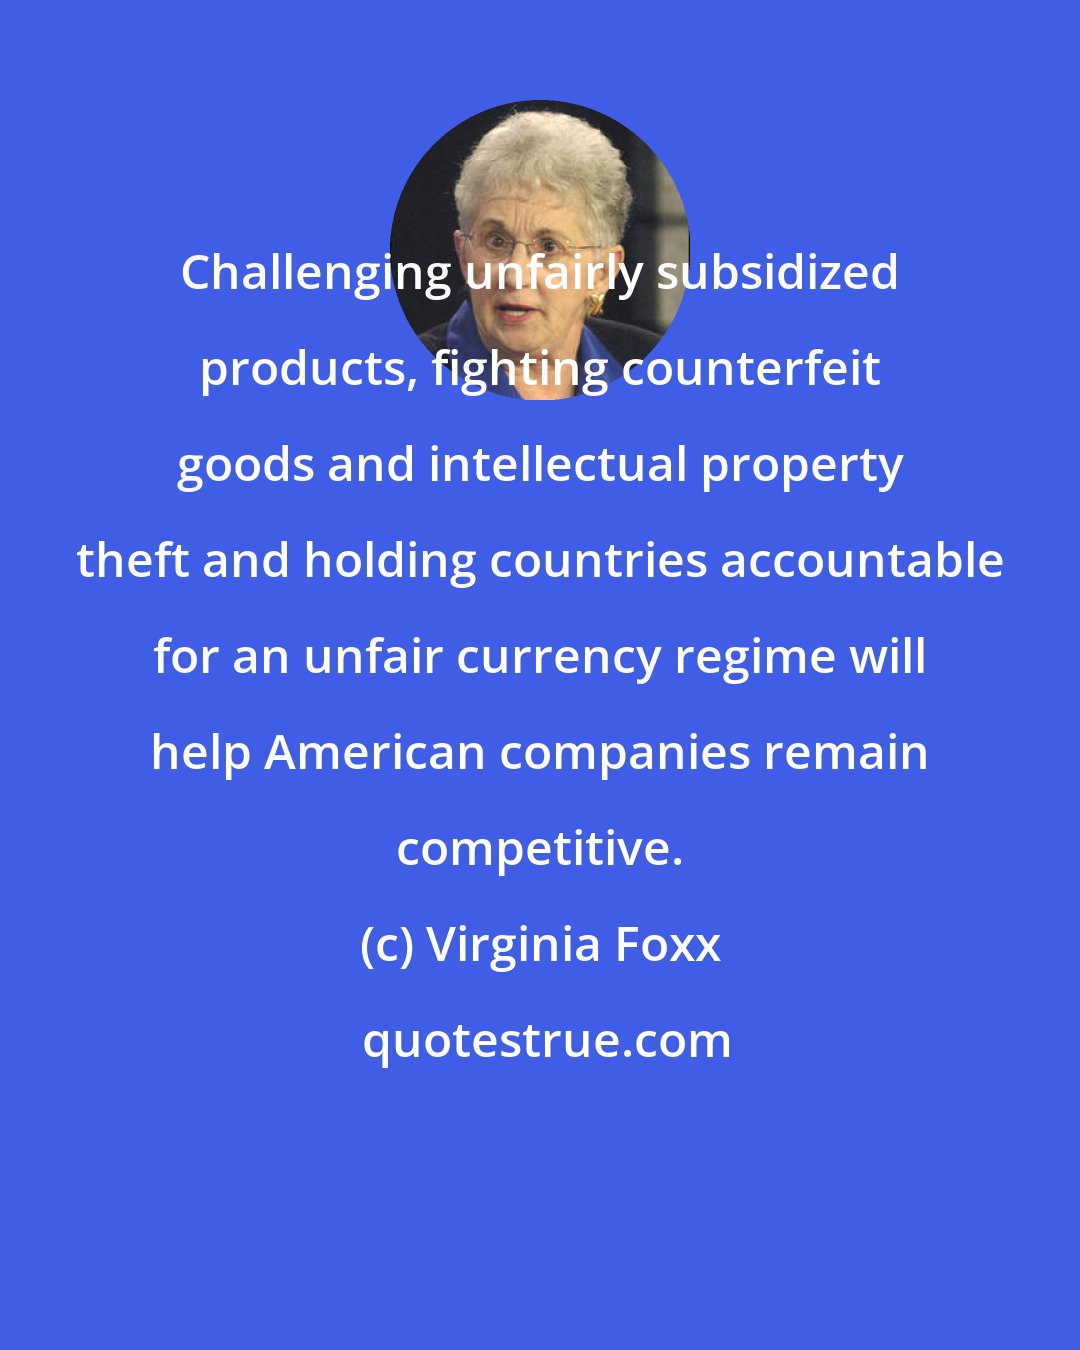 Virginia Foxx: Challenging unfairly subsidized products, fighting counterfeit goods and intellectual property theft and holding countries accountable for an unfair currency regime will help American companies remain competitive.